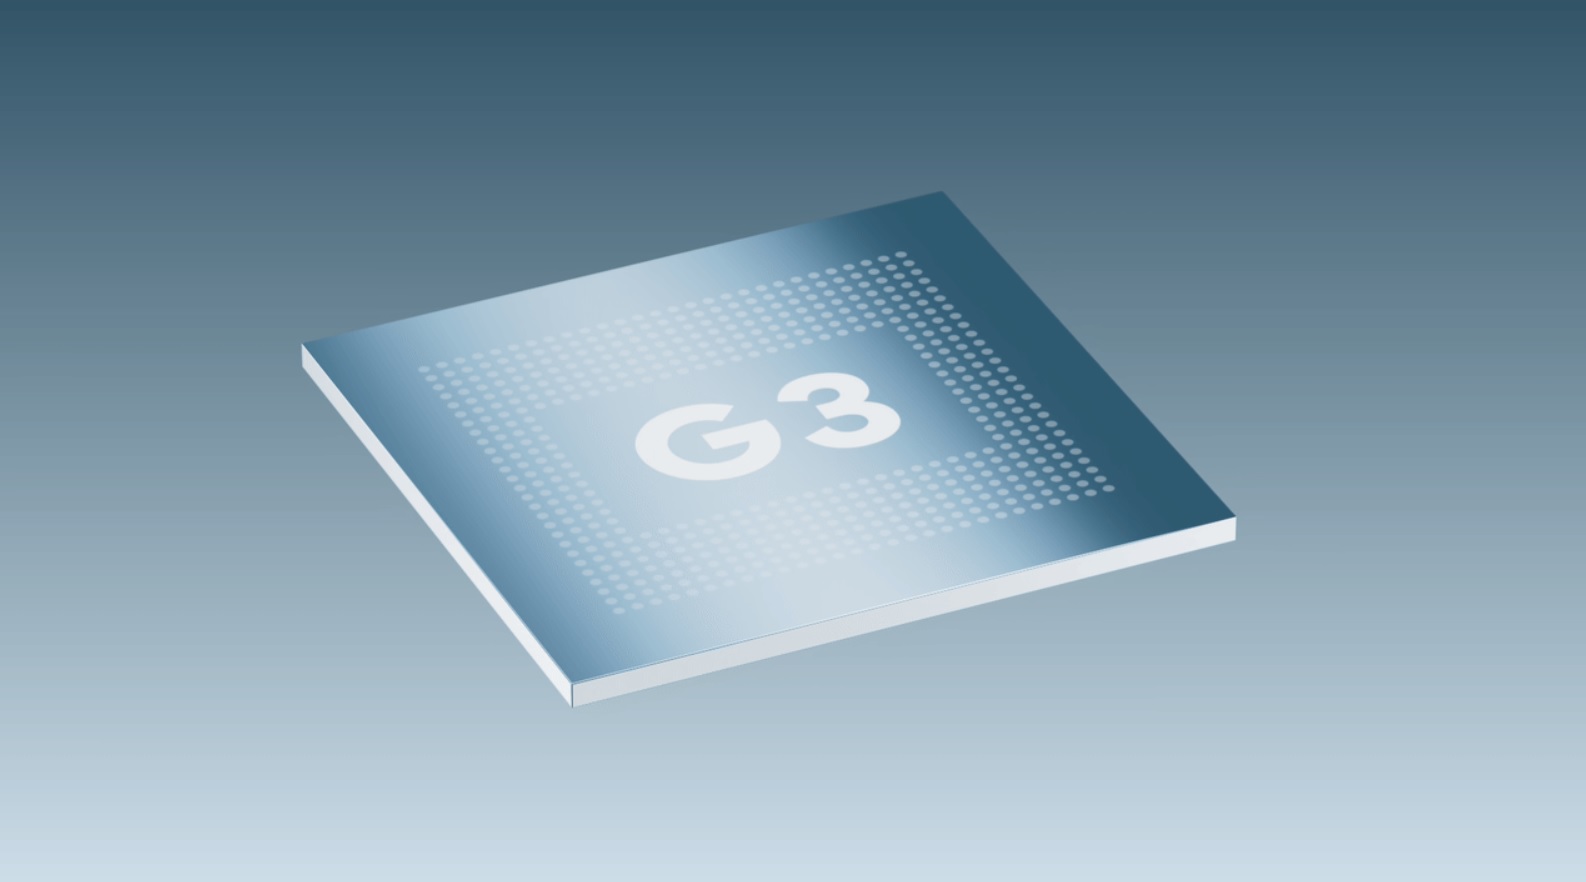 An image of the Google Tensor G3 chip